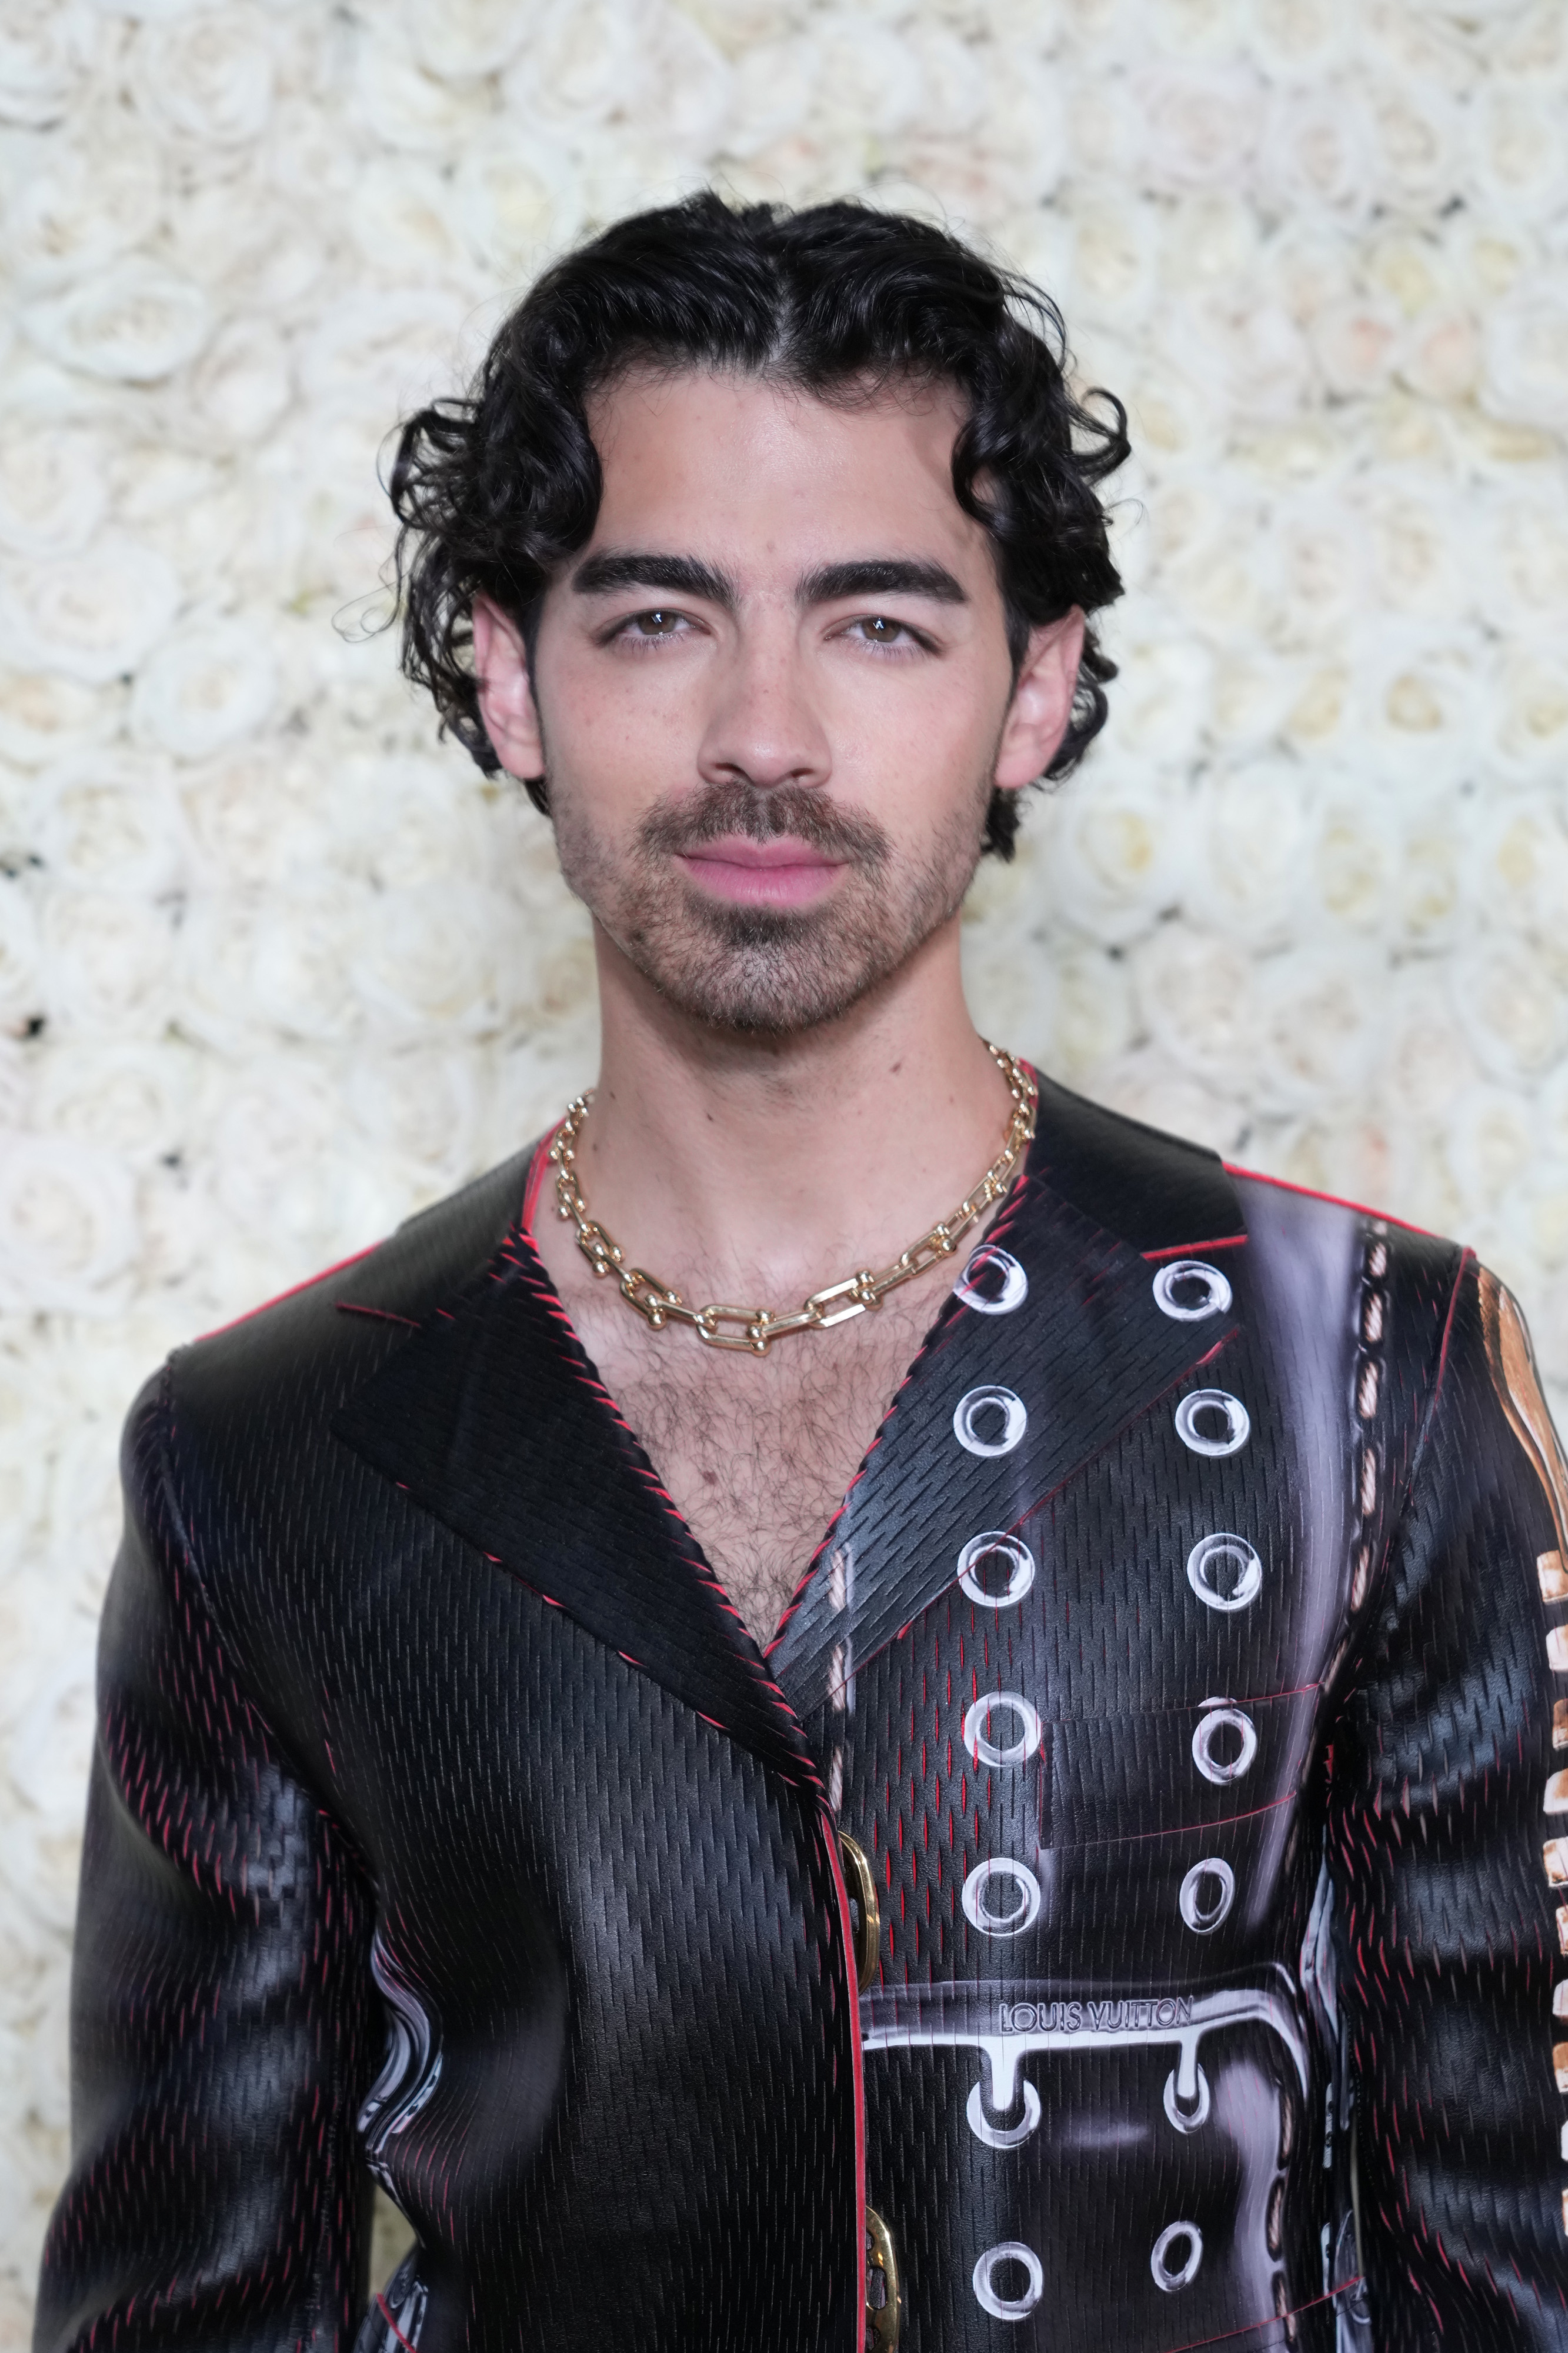 Joe Jonas wearing a patterned suit jacket with metal details and a necklace